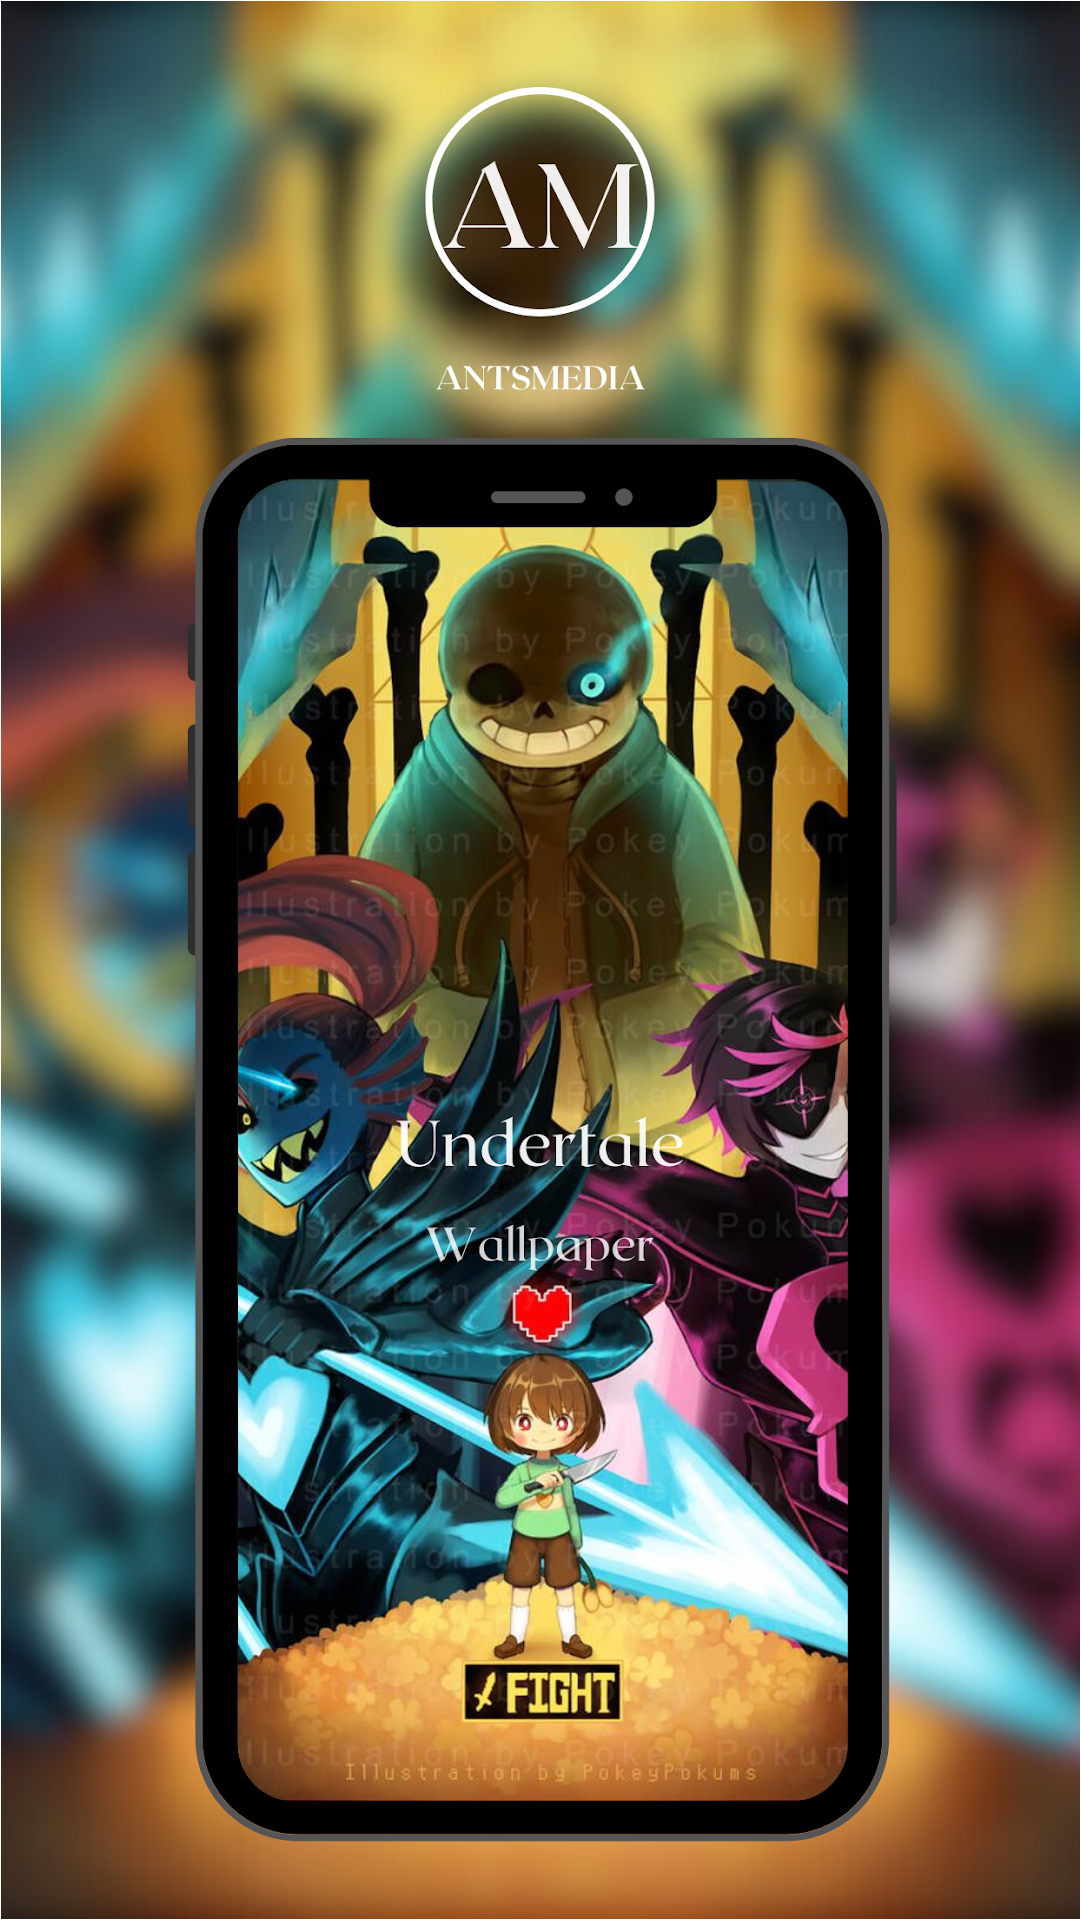 Epic Undertale Wallpapers APK for Android Download